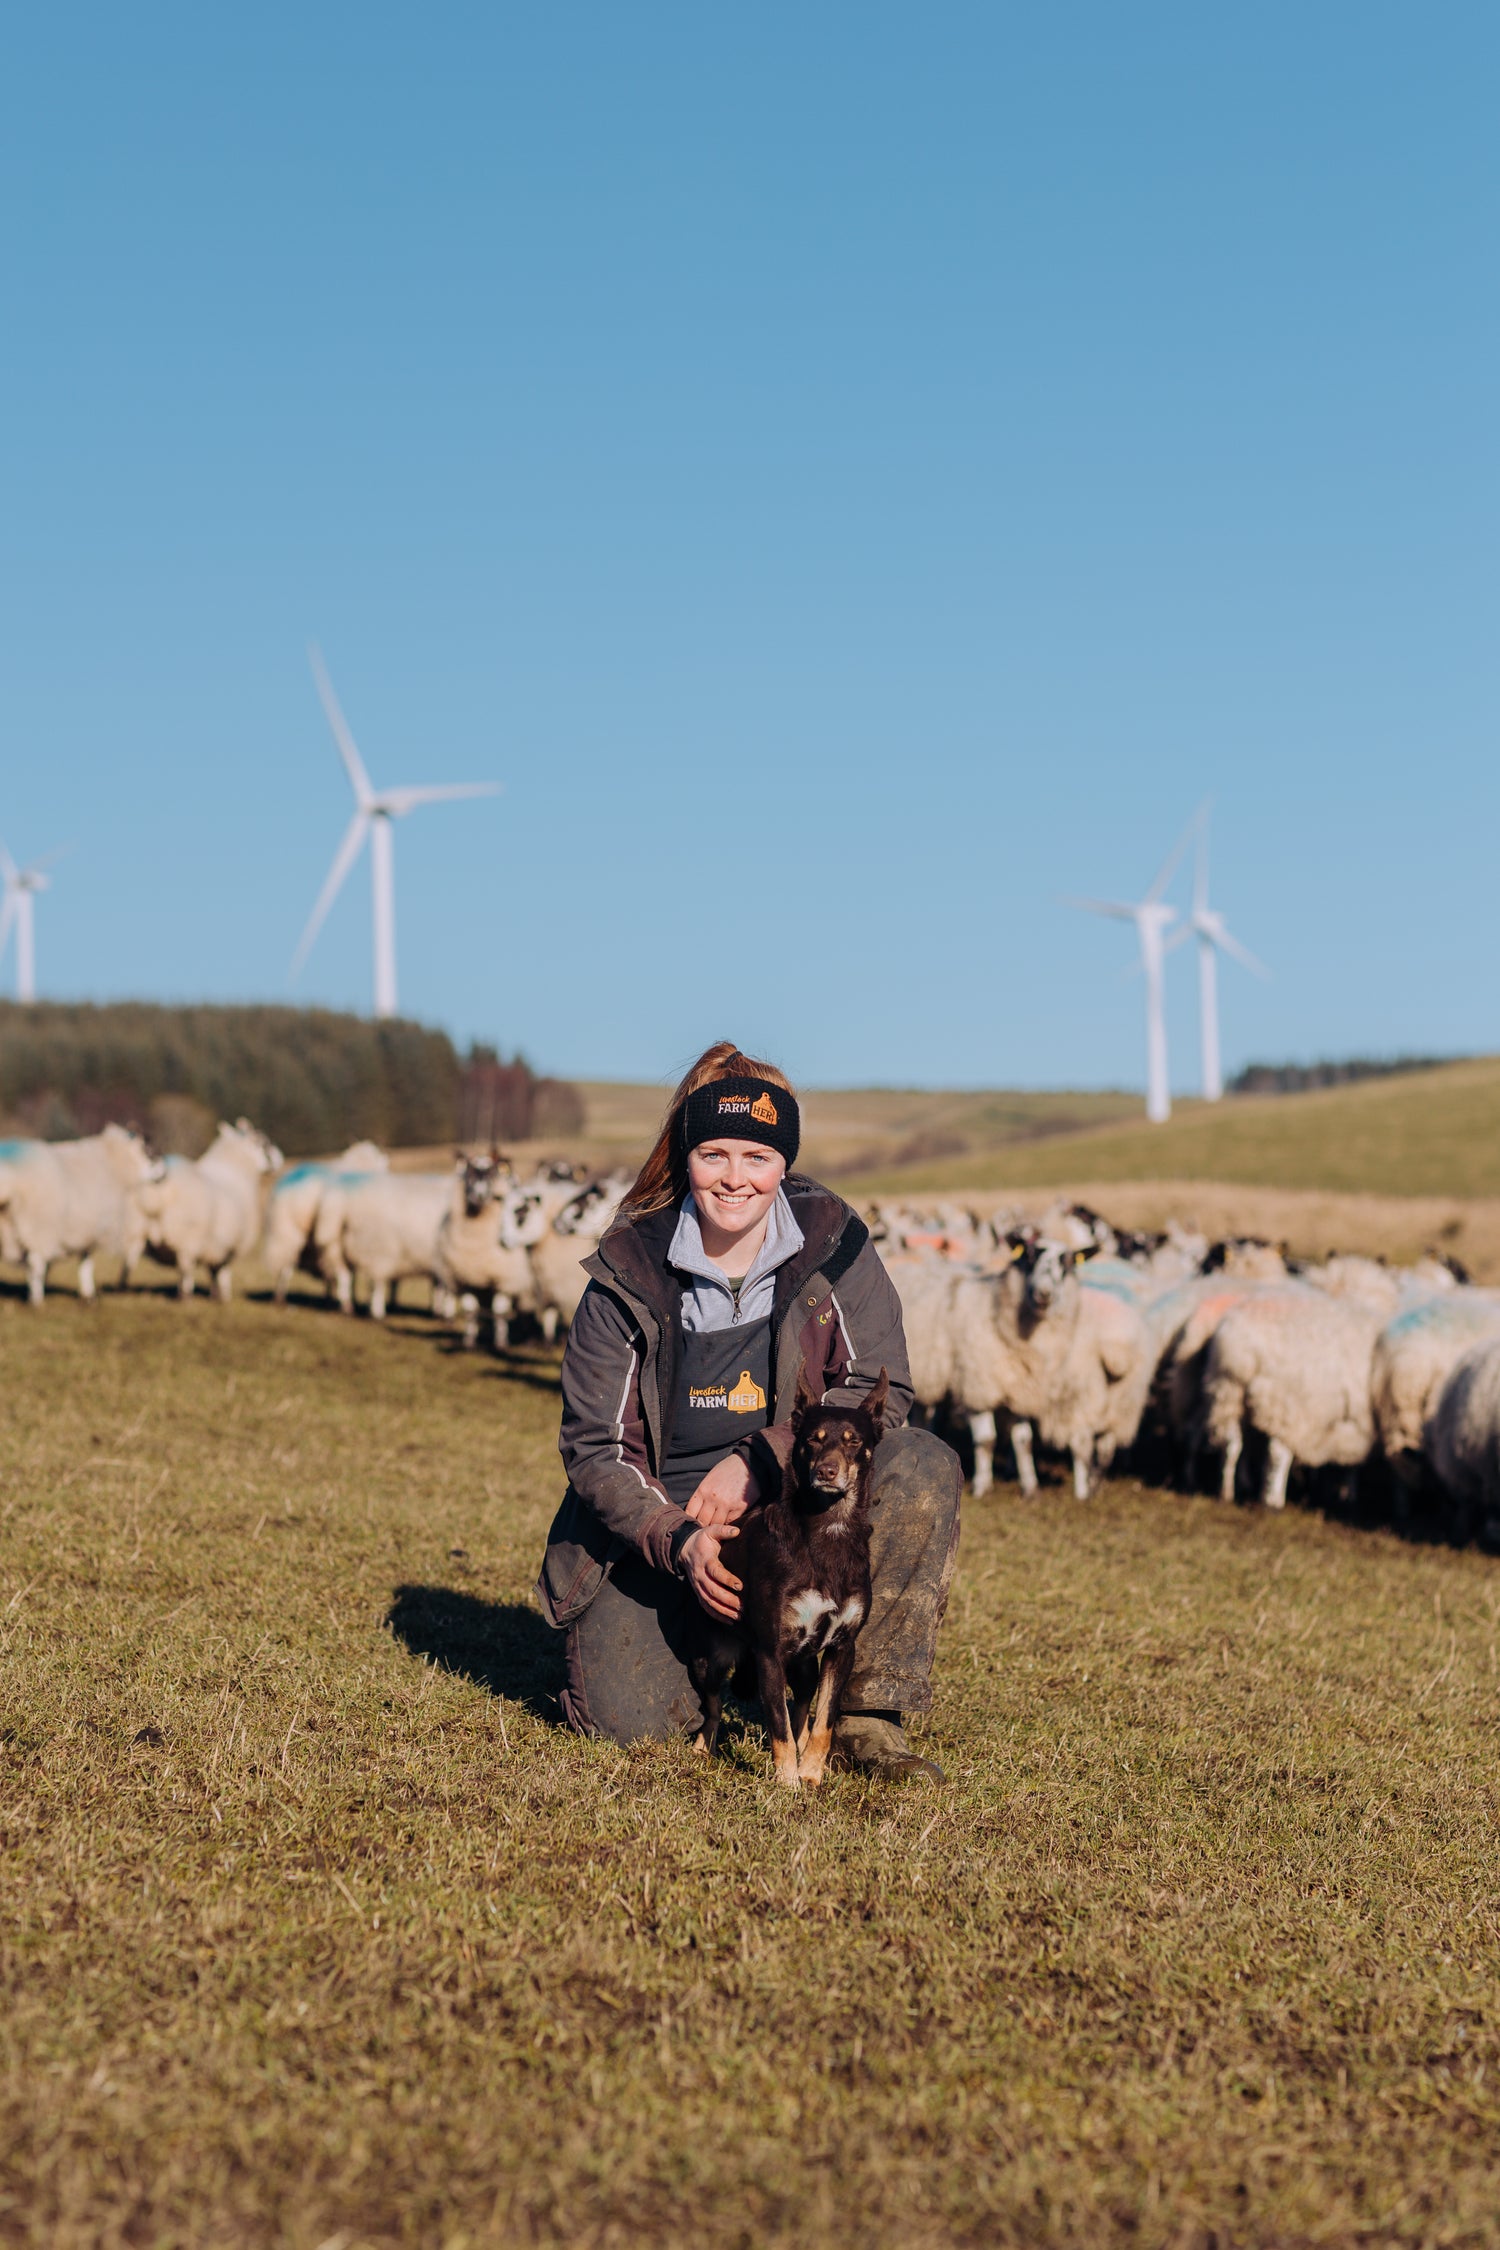 Me, kneeling in front of the sheep, with turbines in the distance, along with Roxy